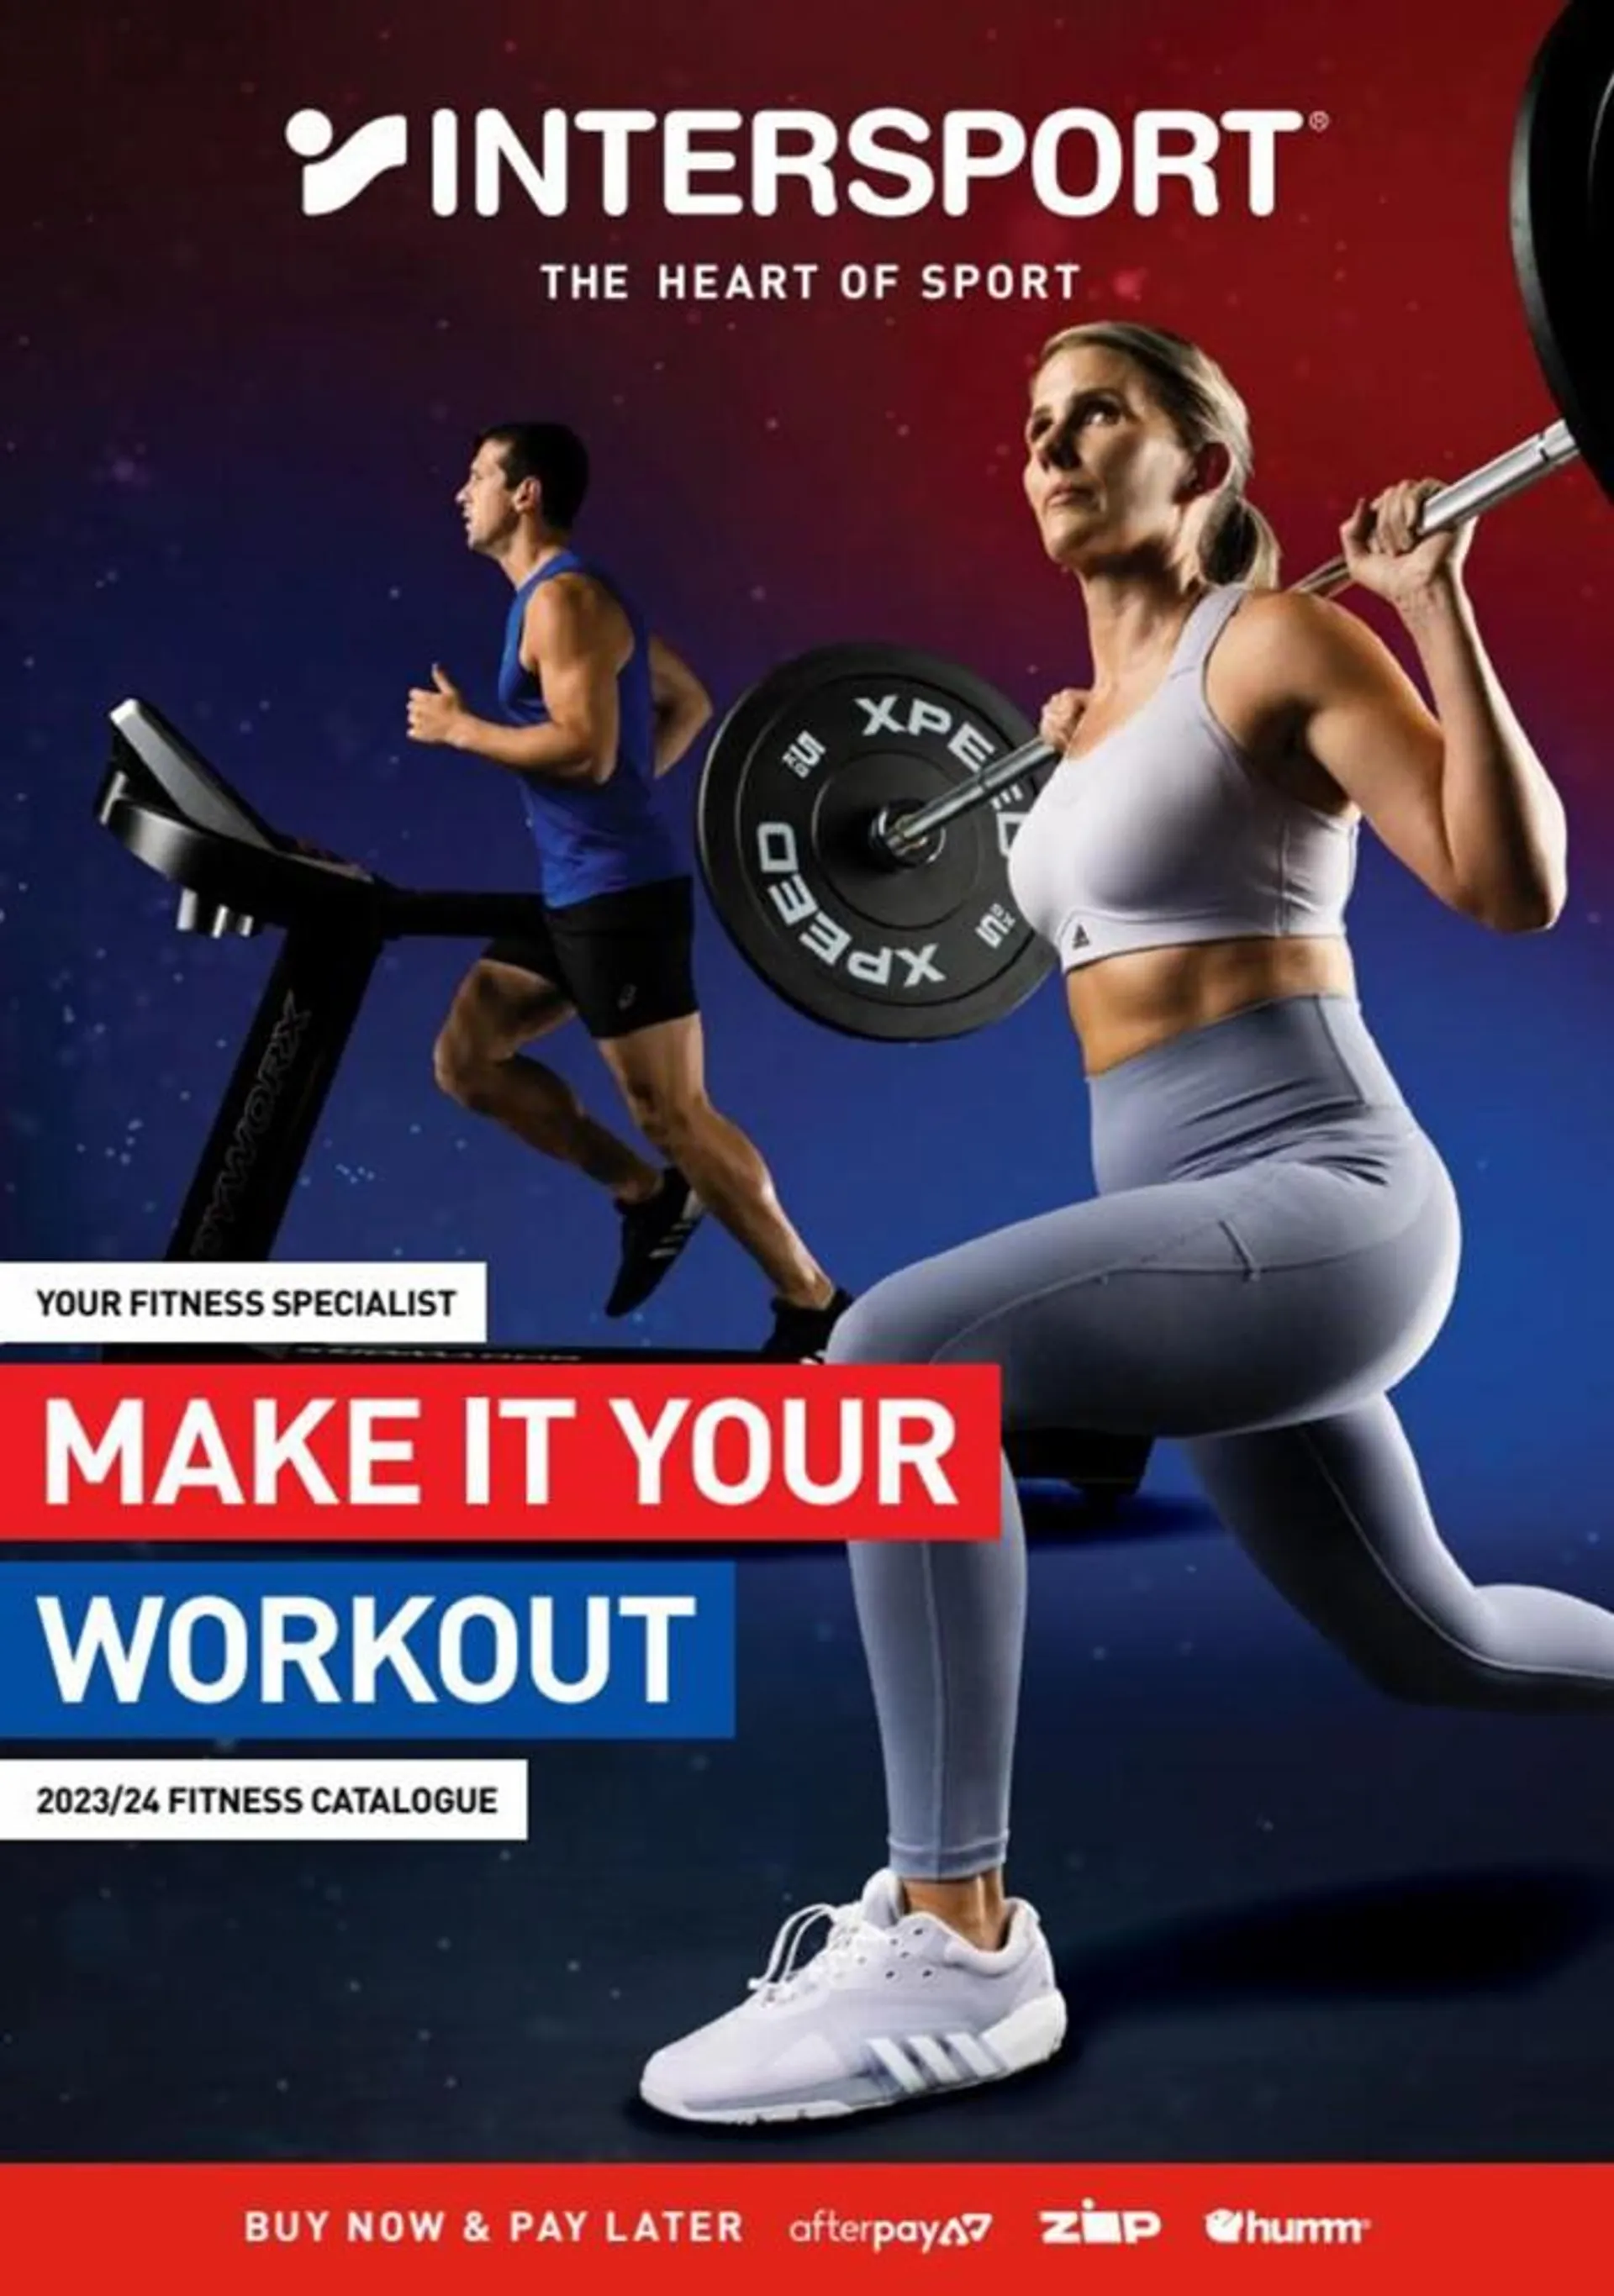 Fitness Campaign - 1